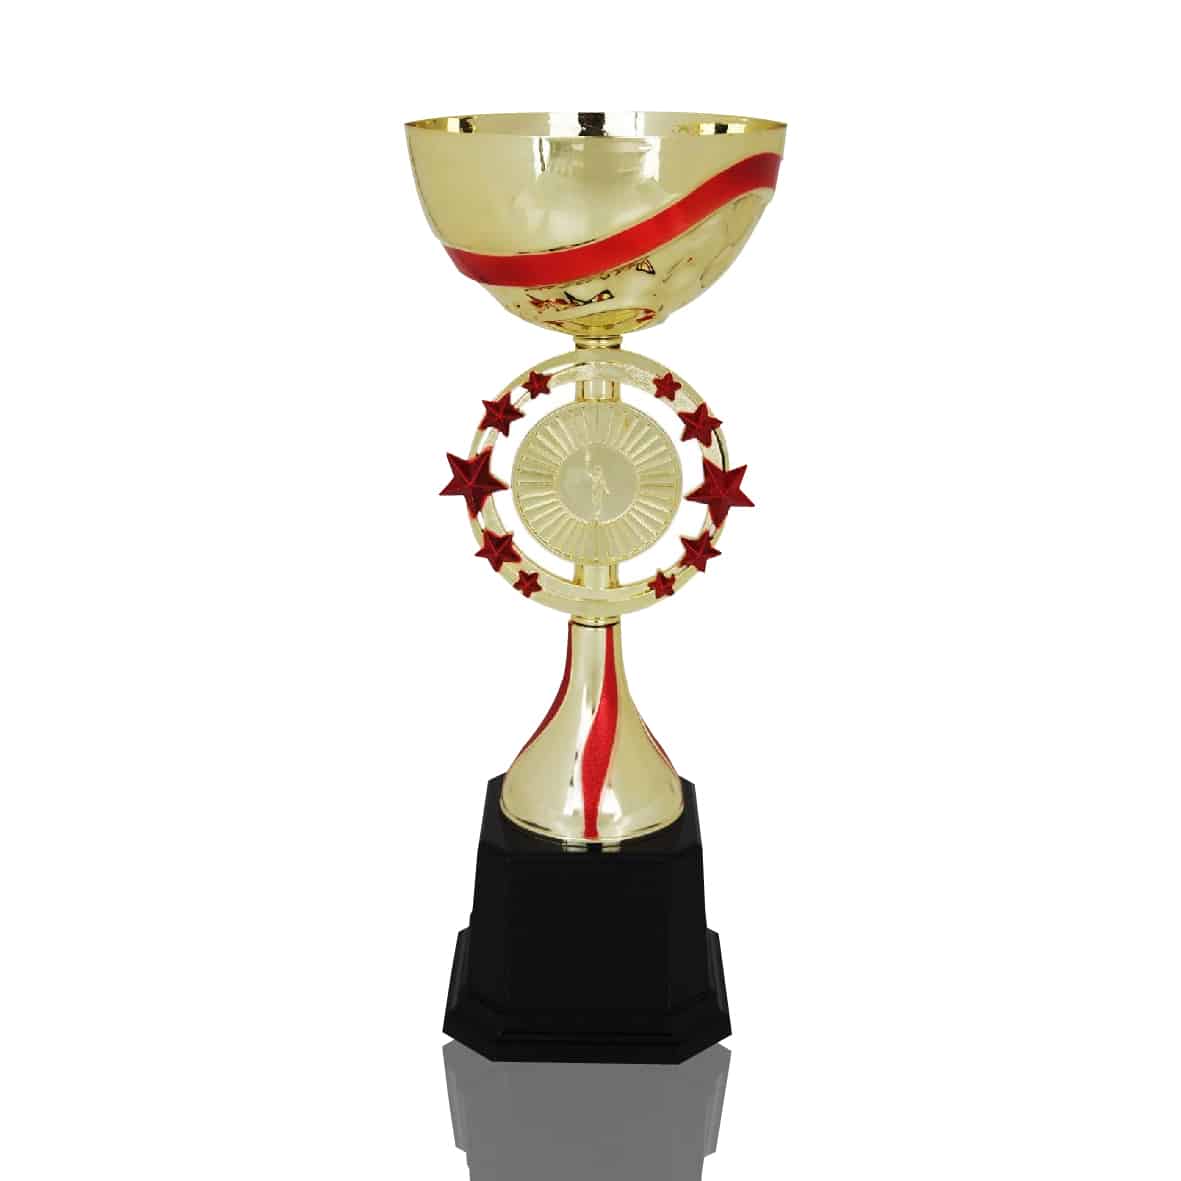 Buy Acrylic Bowl Trophy at Clazz Trophy Malaysia | #1 Rated Trophy Supplier in Malaysia